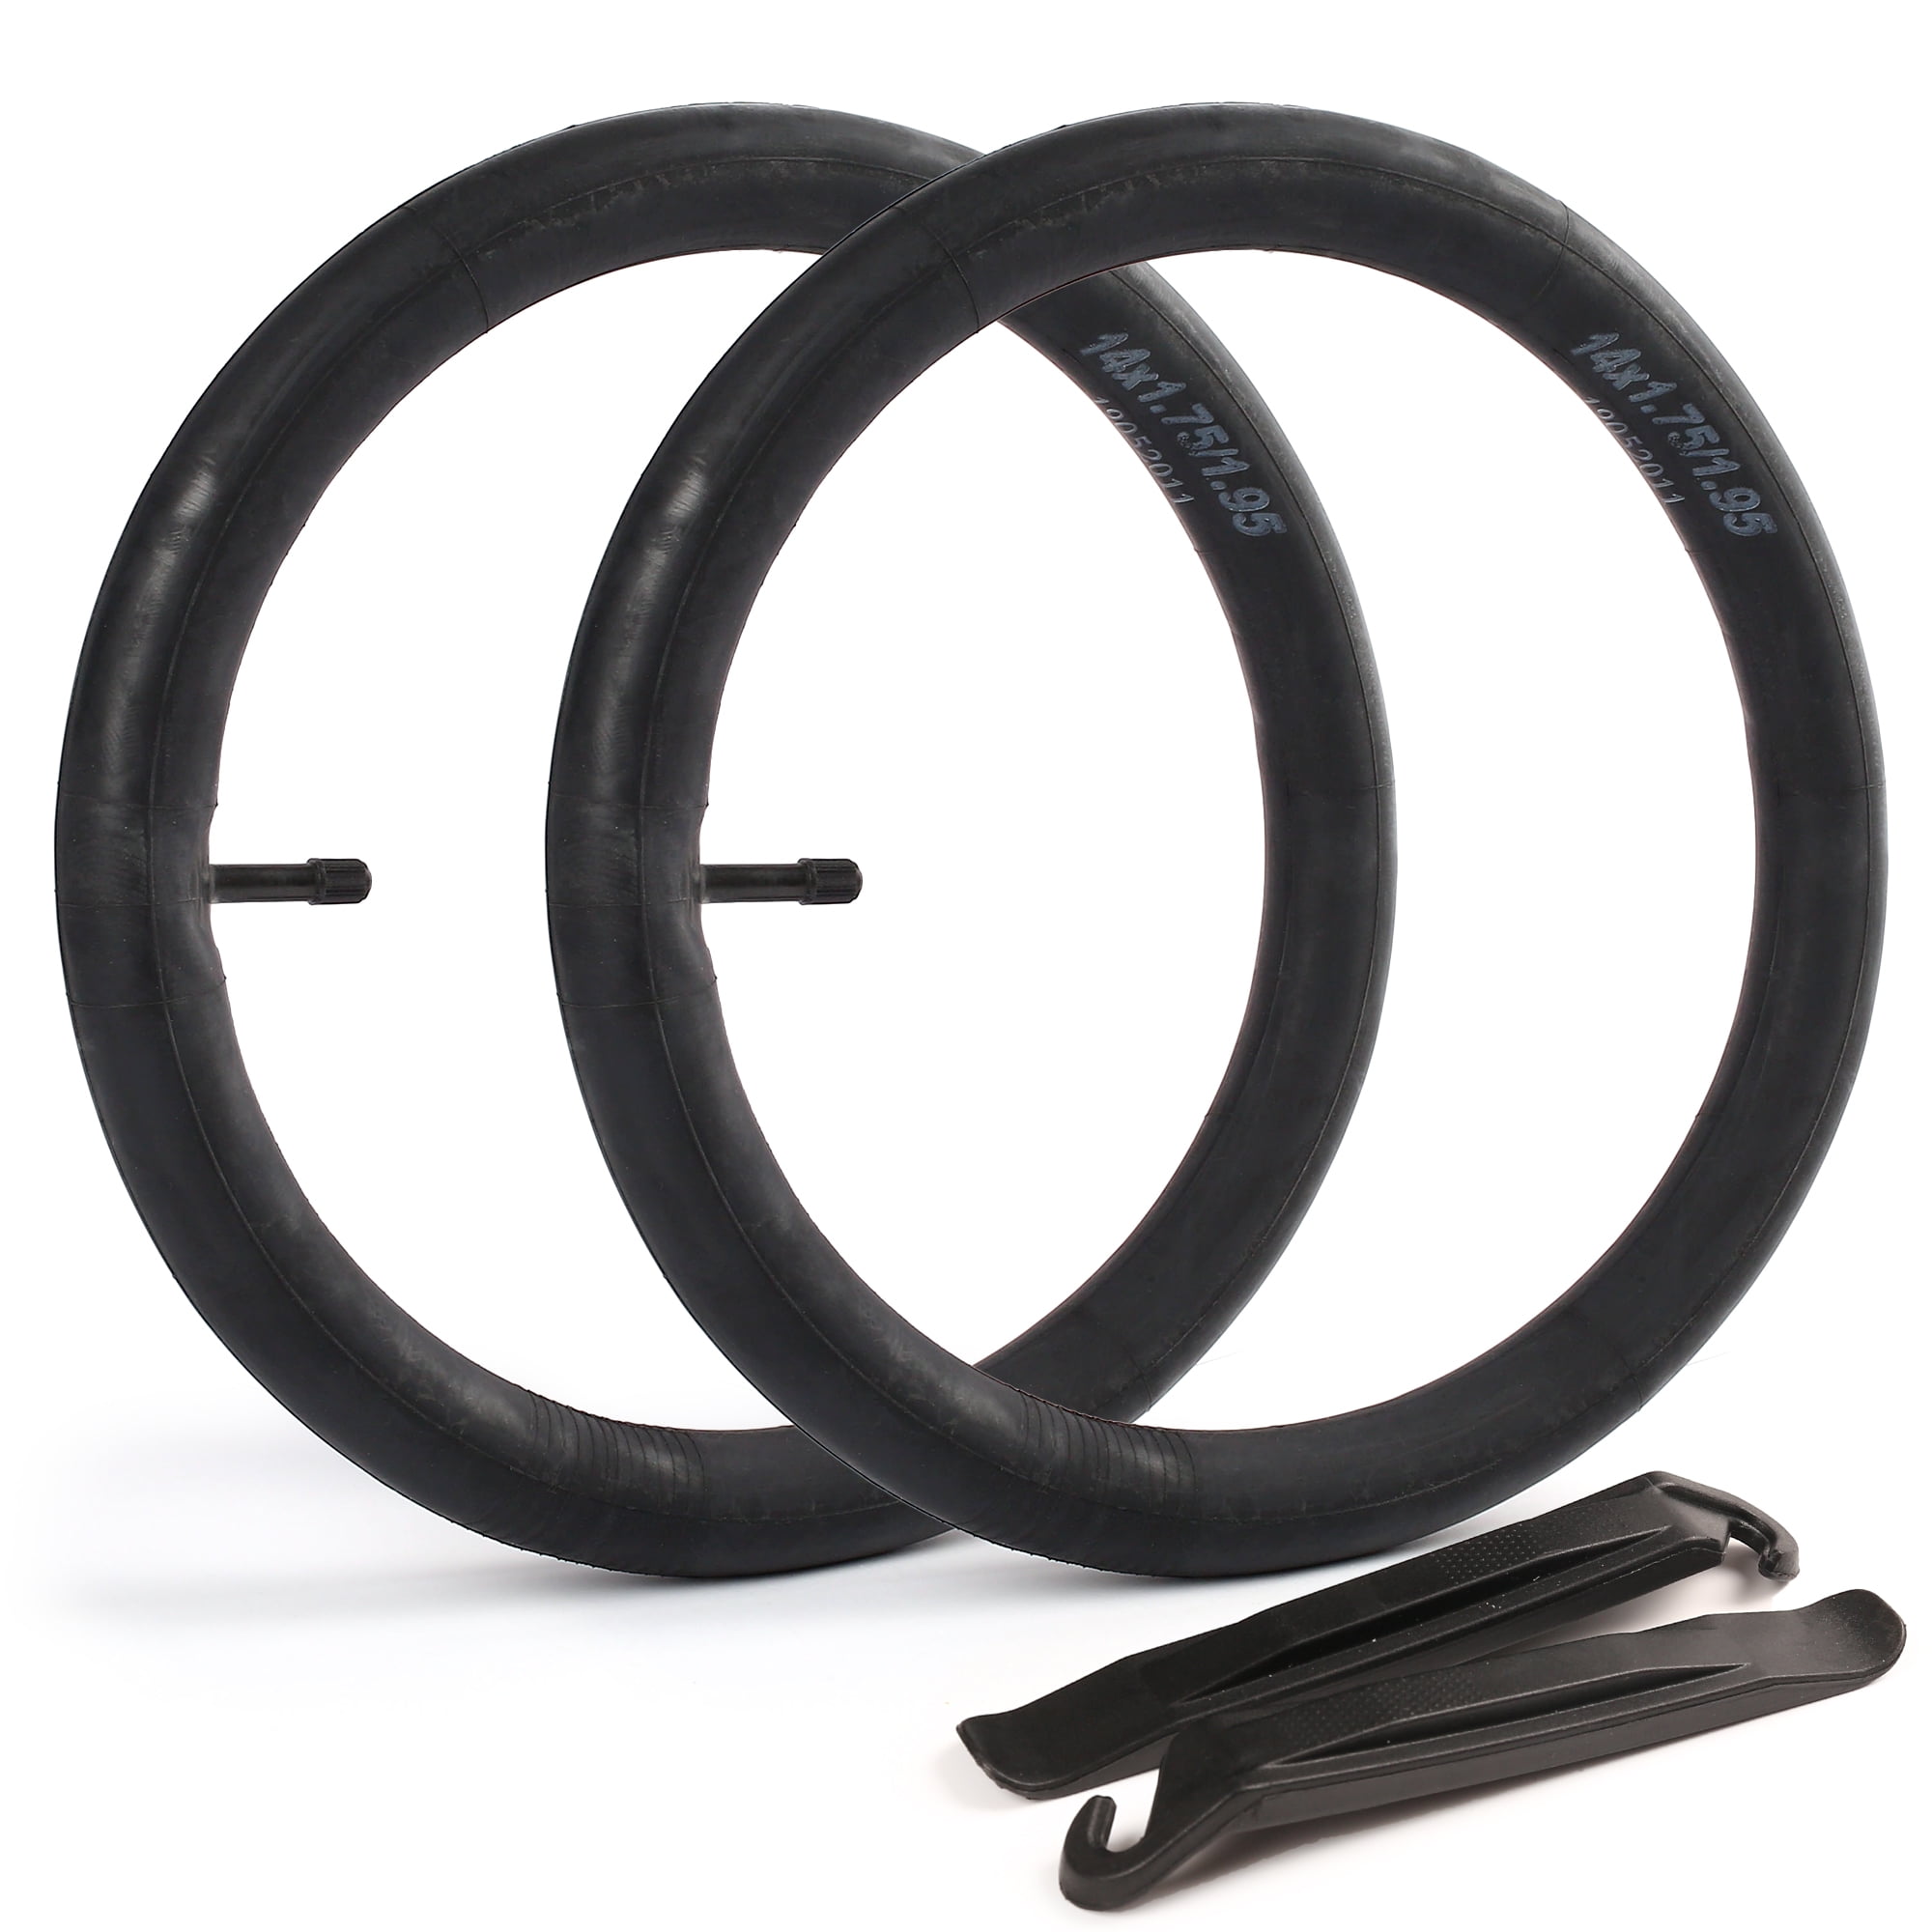 TOP  QUALITY INNER TUBES FITS  14 x 1.75 CHILDS BIKE SIZES -CLEARANCE  BARGAIN 